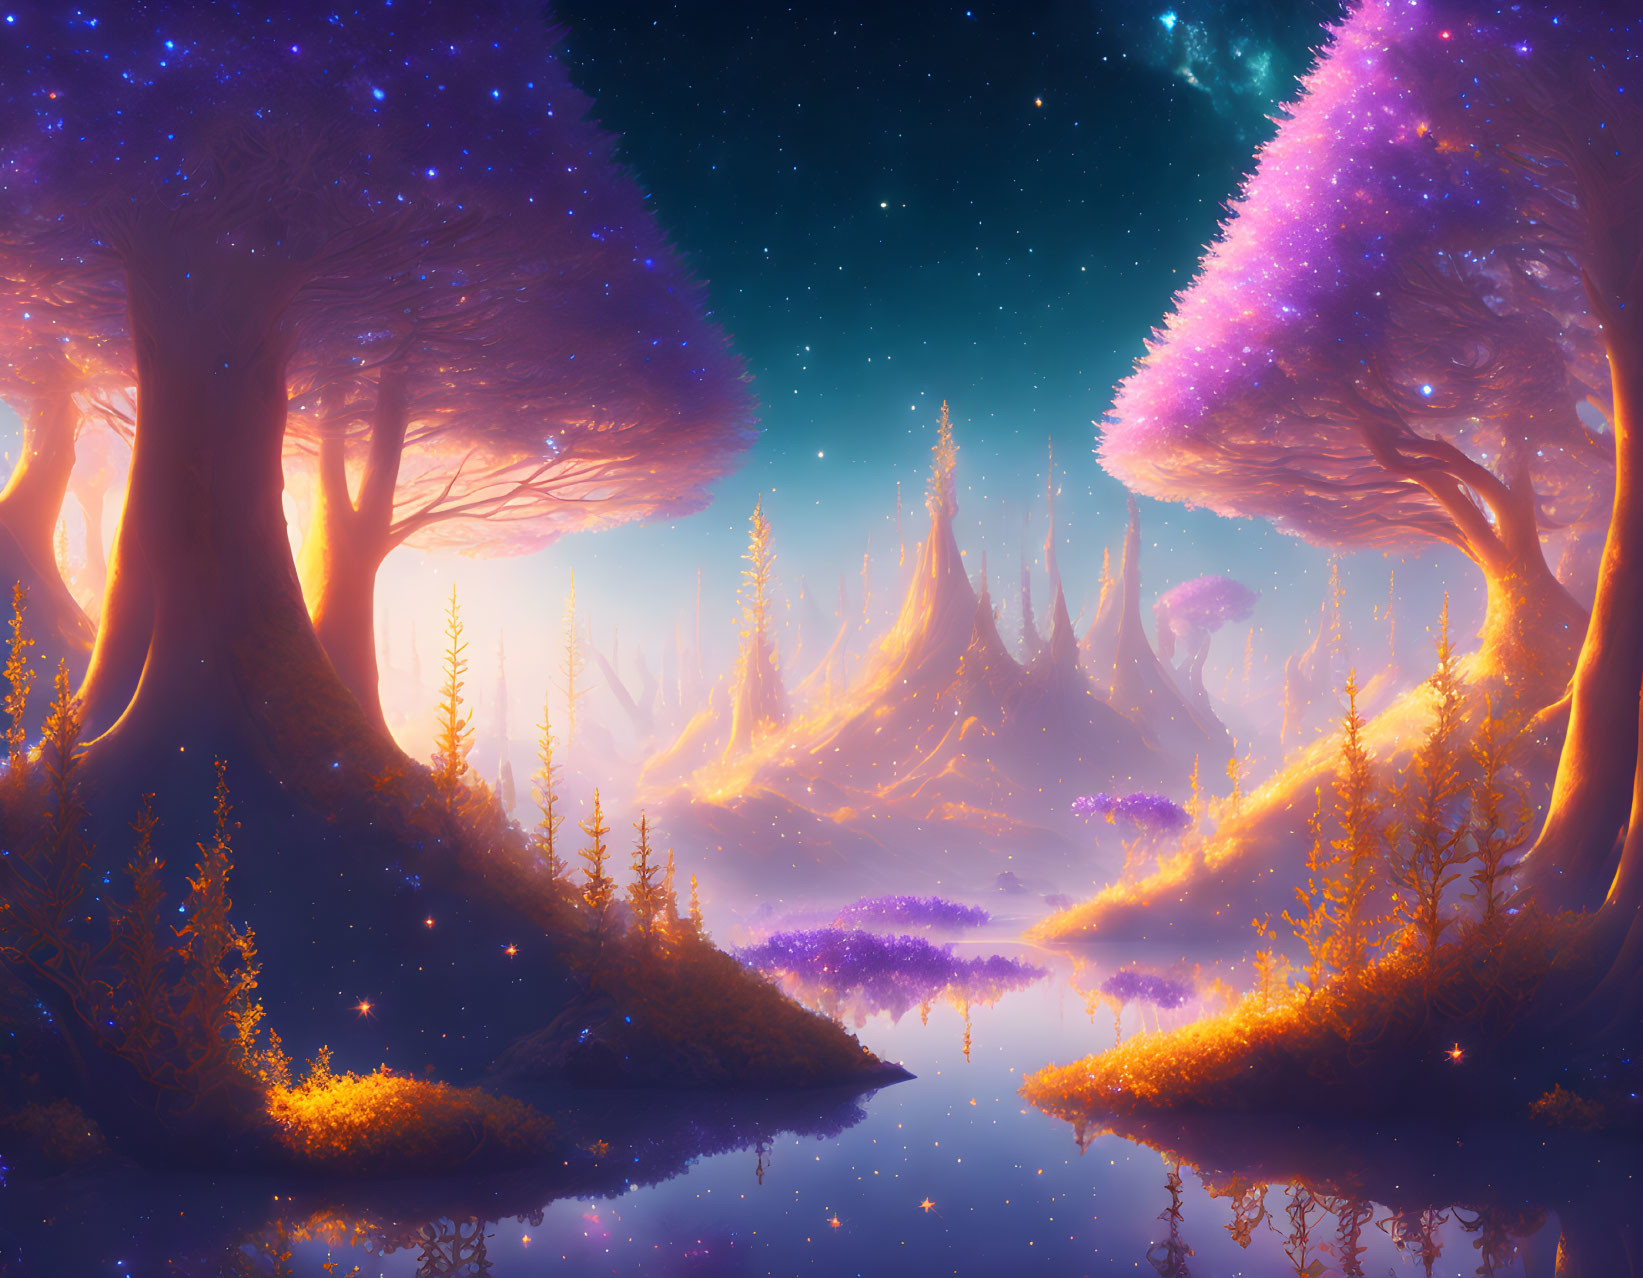 Mystical landscape with towering trees, calm lake, starry sky, glowing flora, and distant